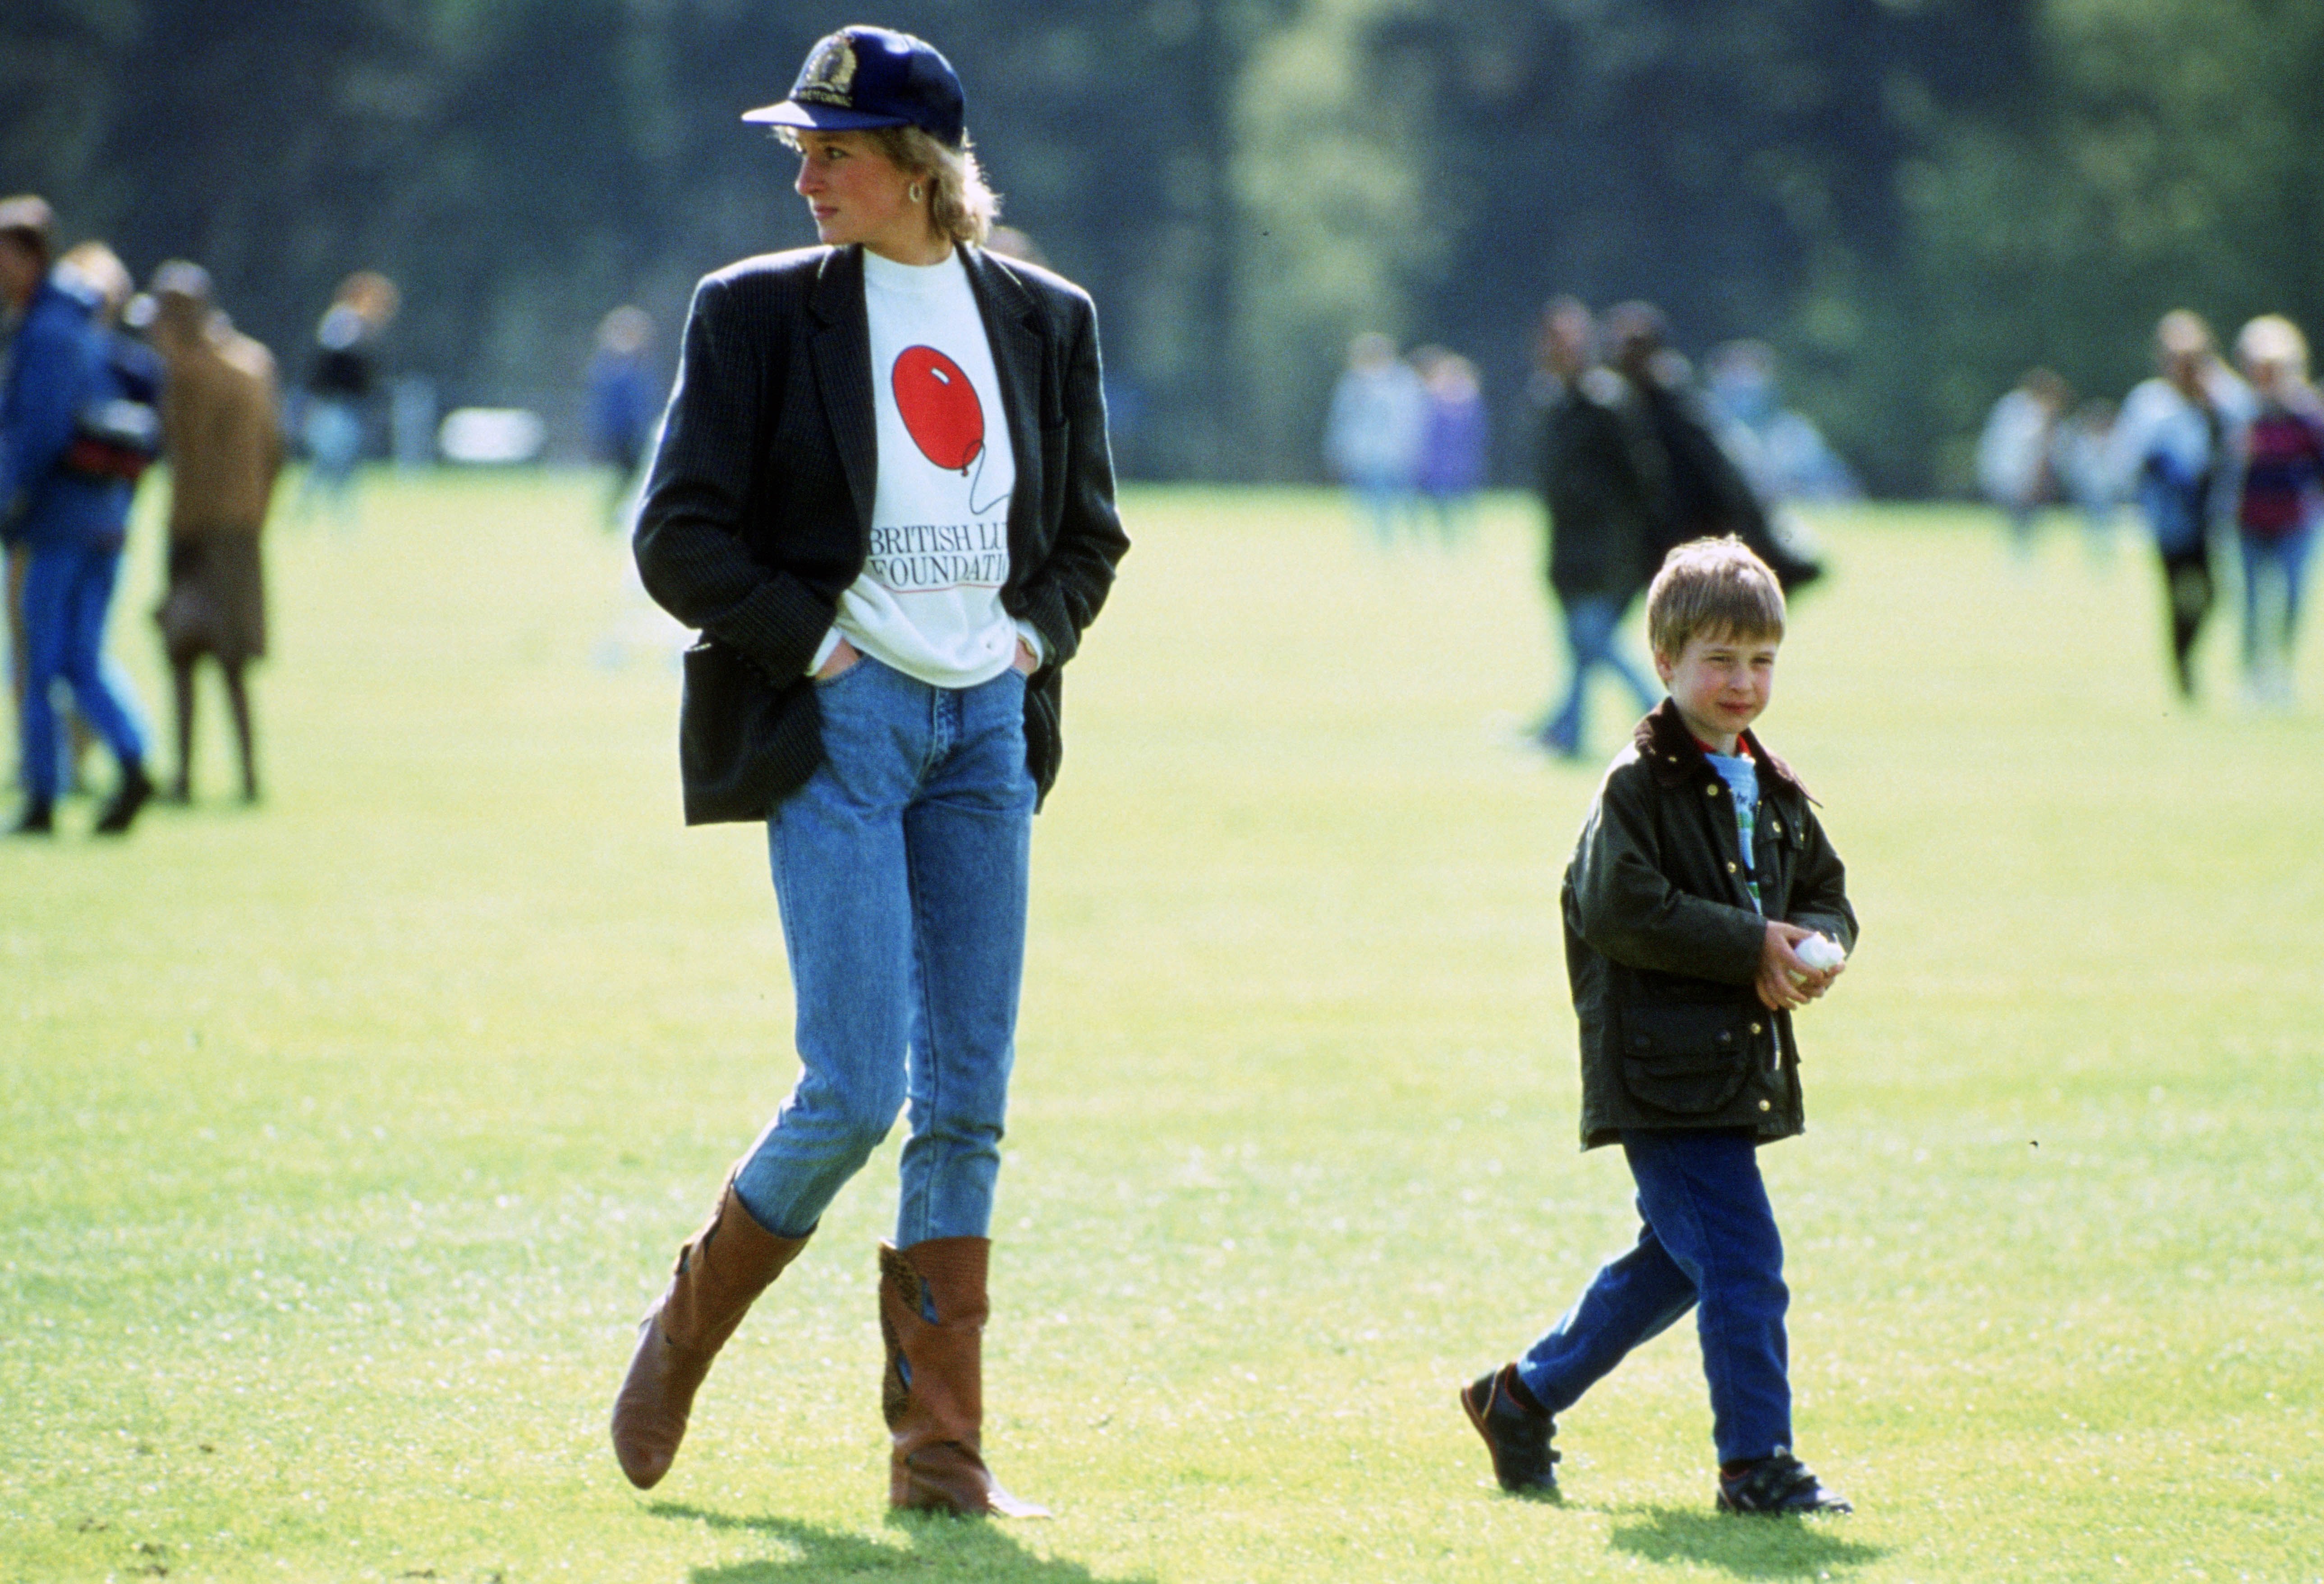 the princess and her son walk across a green, the former wearing brown cowboy boots, blue jeans and a British lung foundation sweatshirt under a black blazer